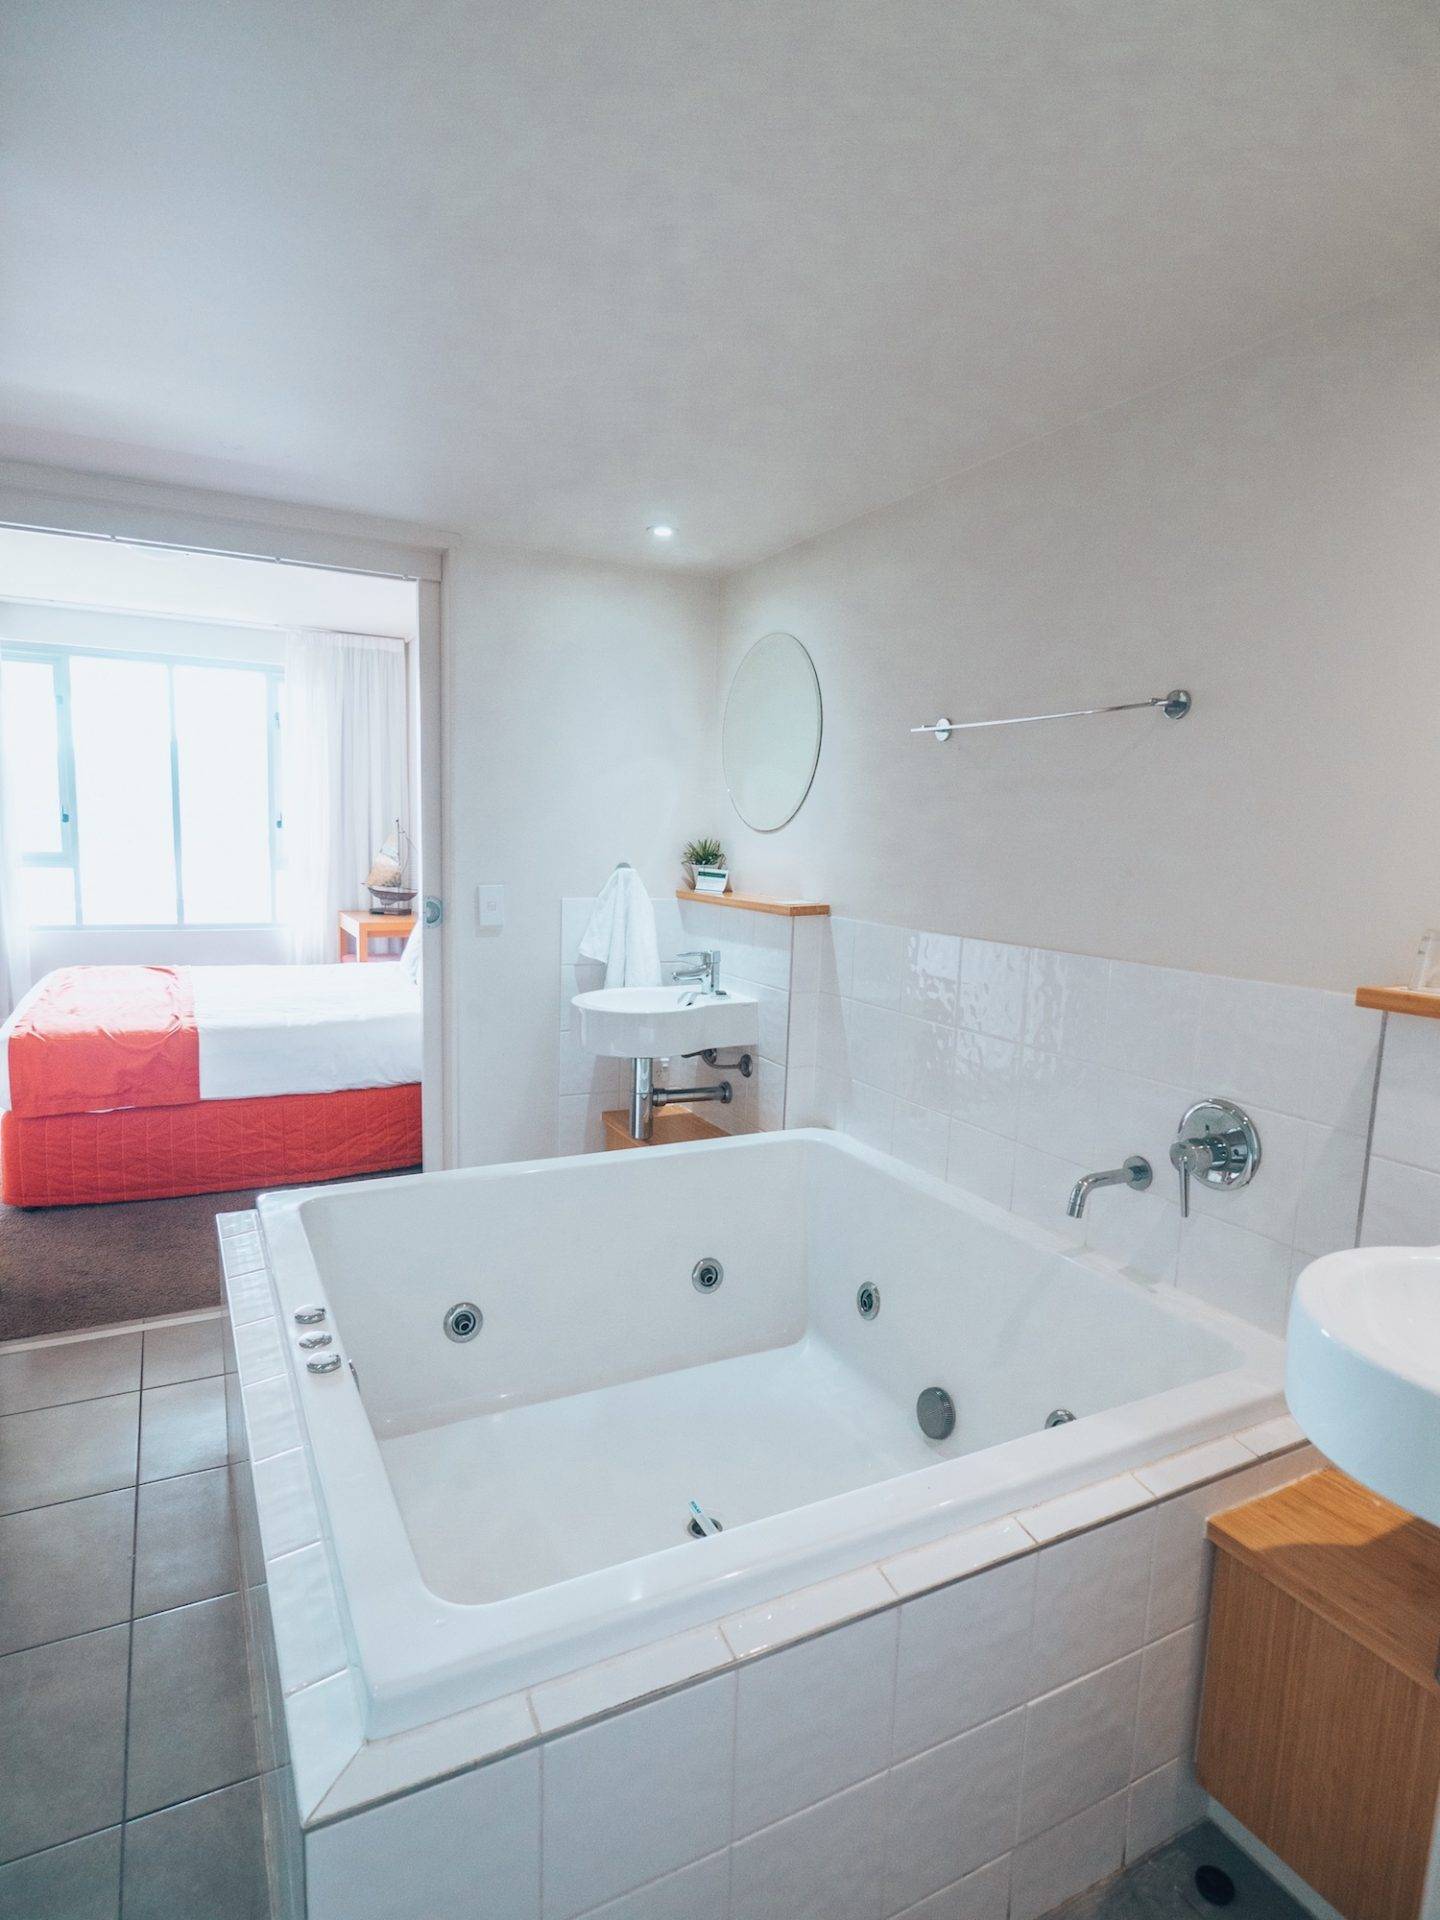 The spacious rooms at Peppers Airlie Beach were one of the reasons we loved staying at this resort. Just look at the size of this bathroom and bathtub in our suite!